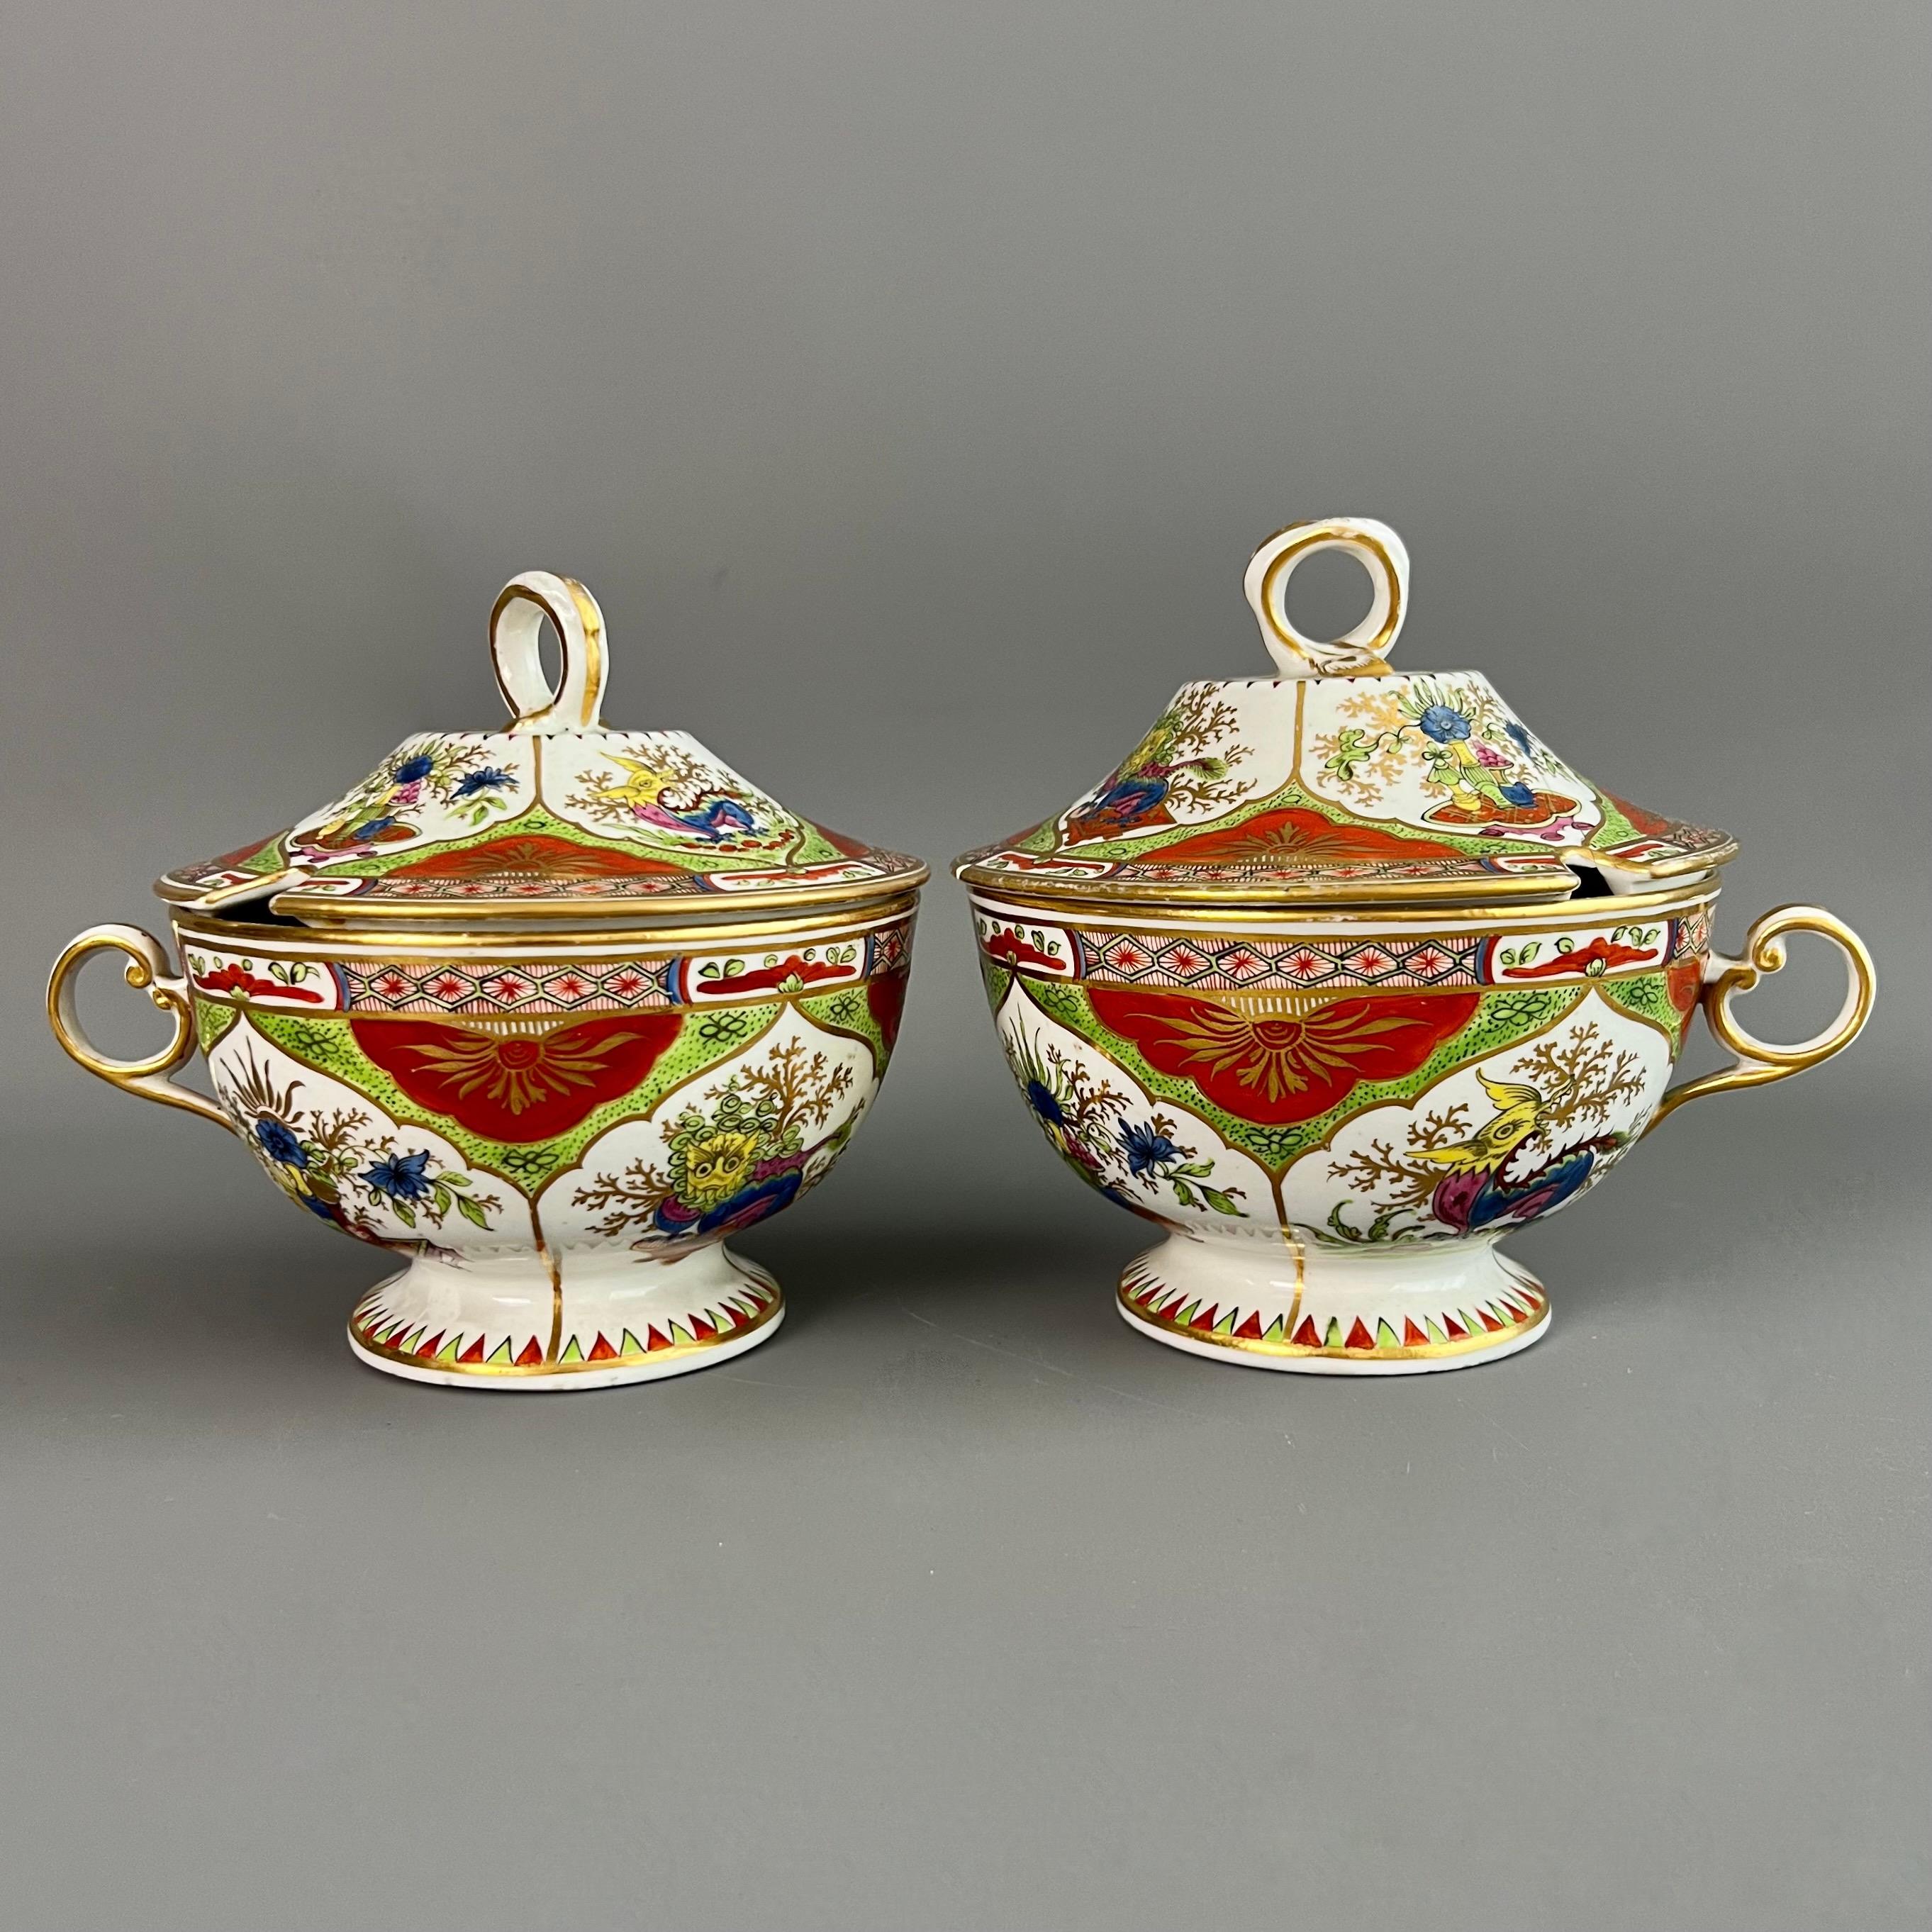 Porcelain Chamberlain's Worcester Dessert Service Kylin / Dragons in Compartments, ca 1795